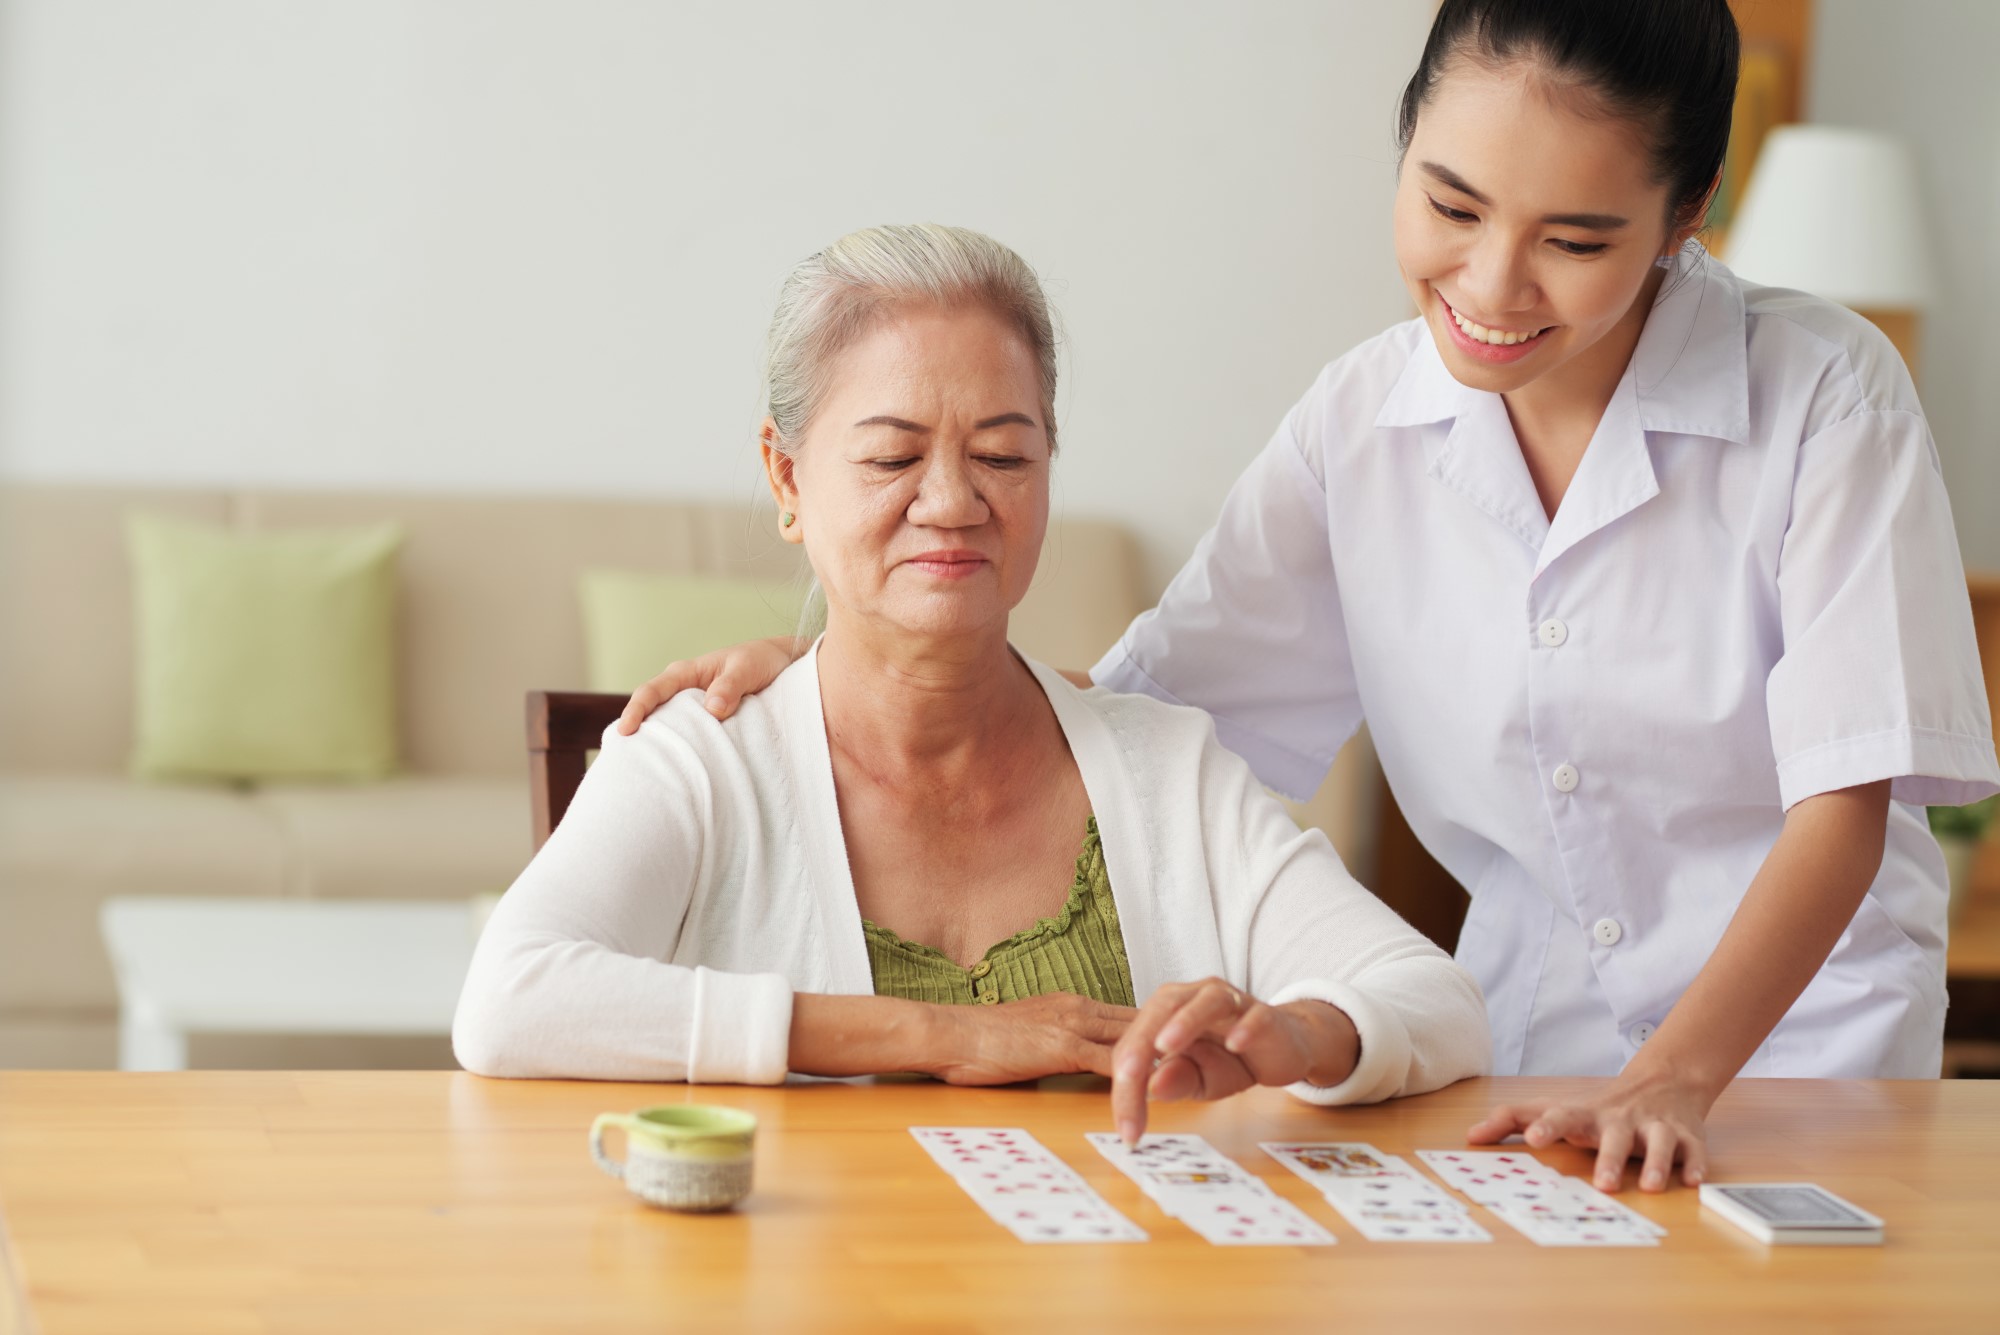 Skilled nursing care performed to help a patient with cognitive tests